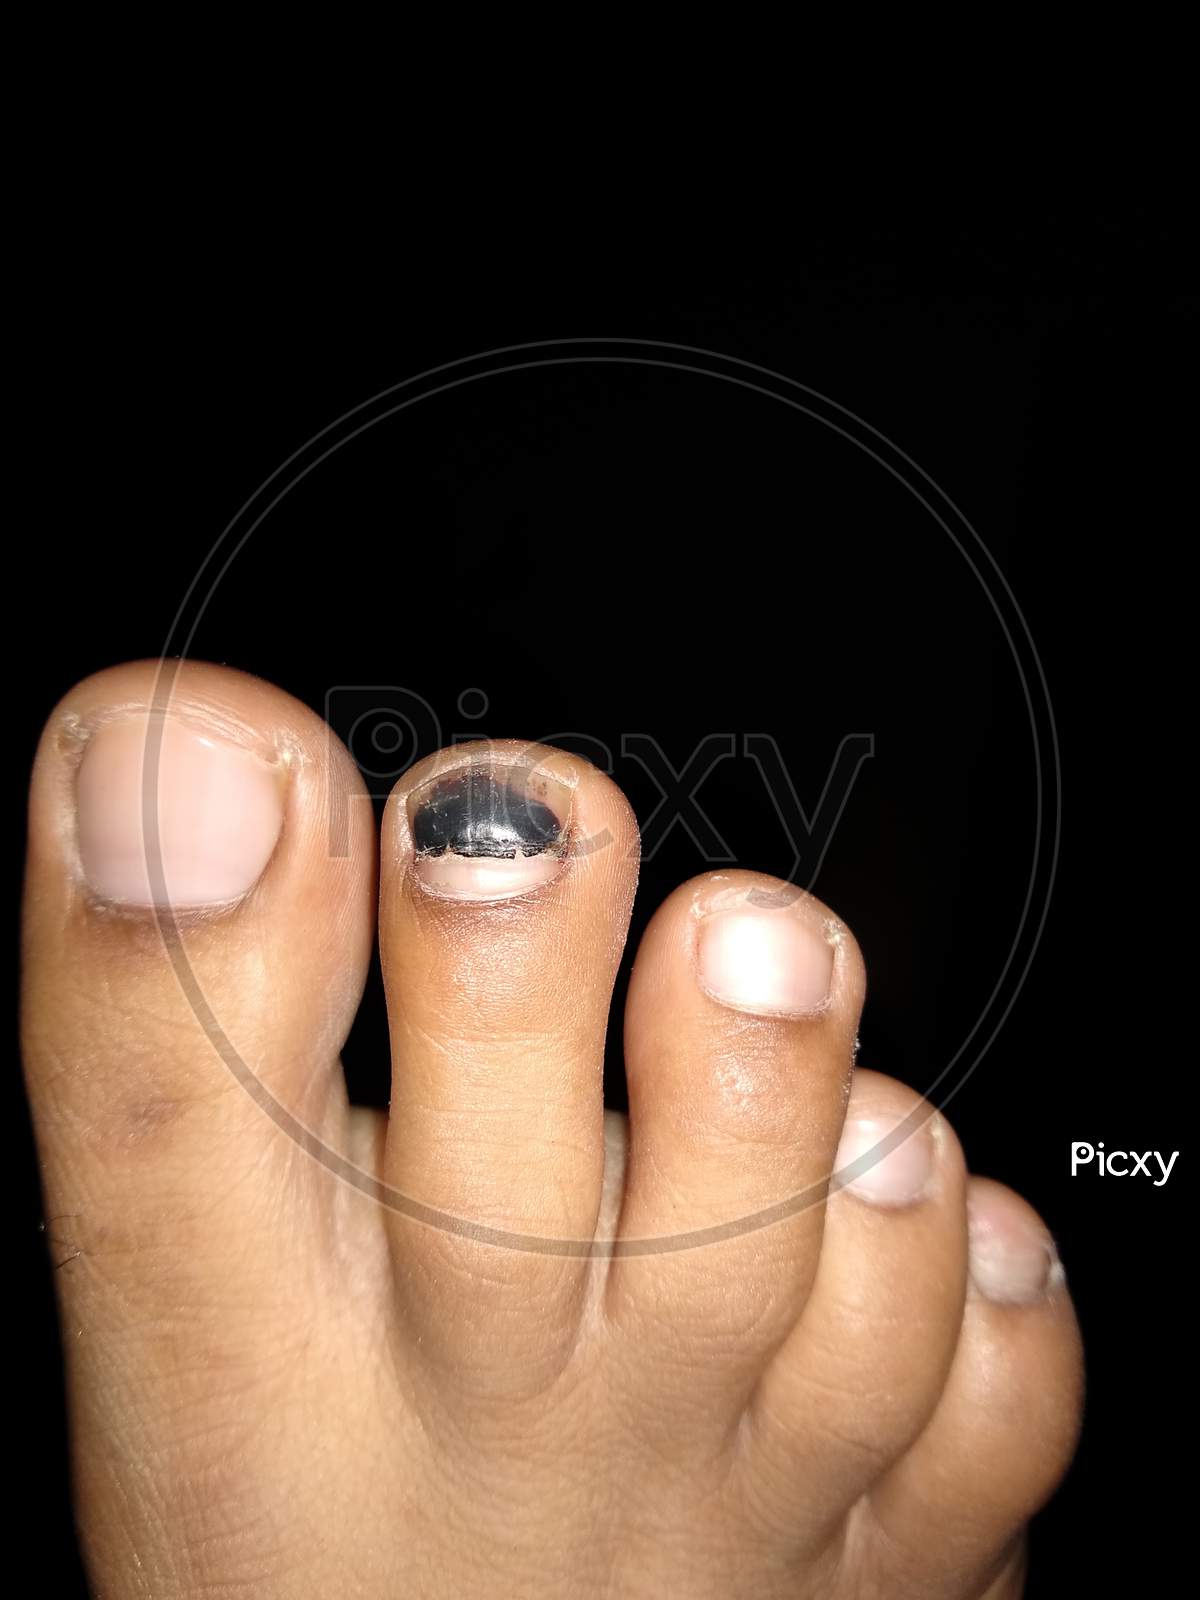 Close up view of cracked and black bruise index toe nail isolated on black background. Human foot with black bruise toe nail